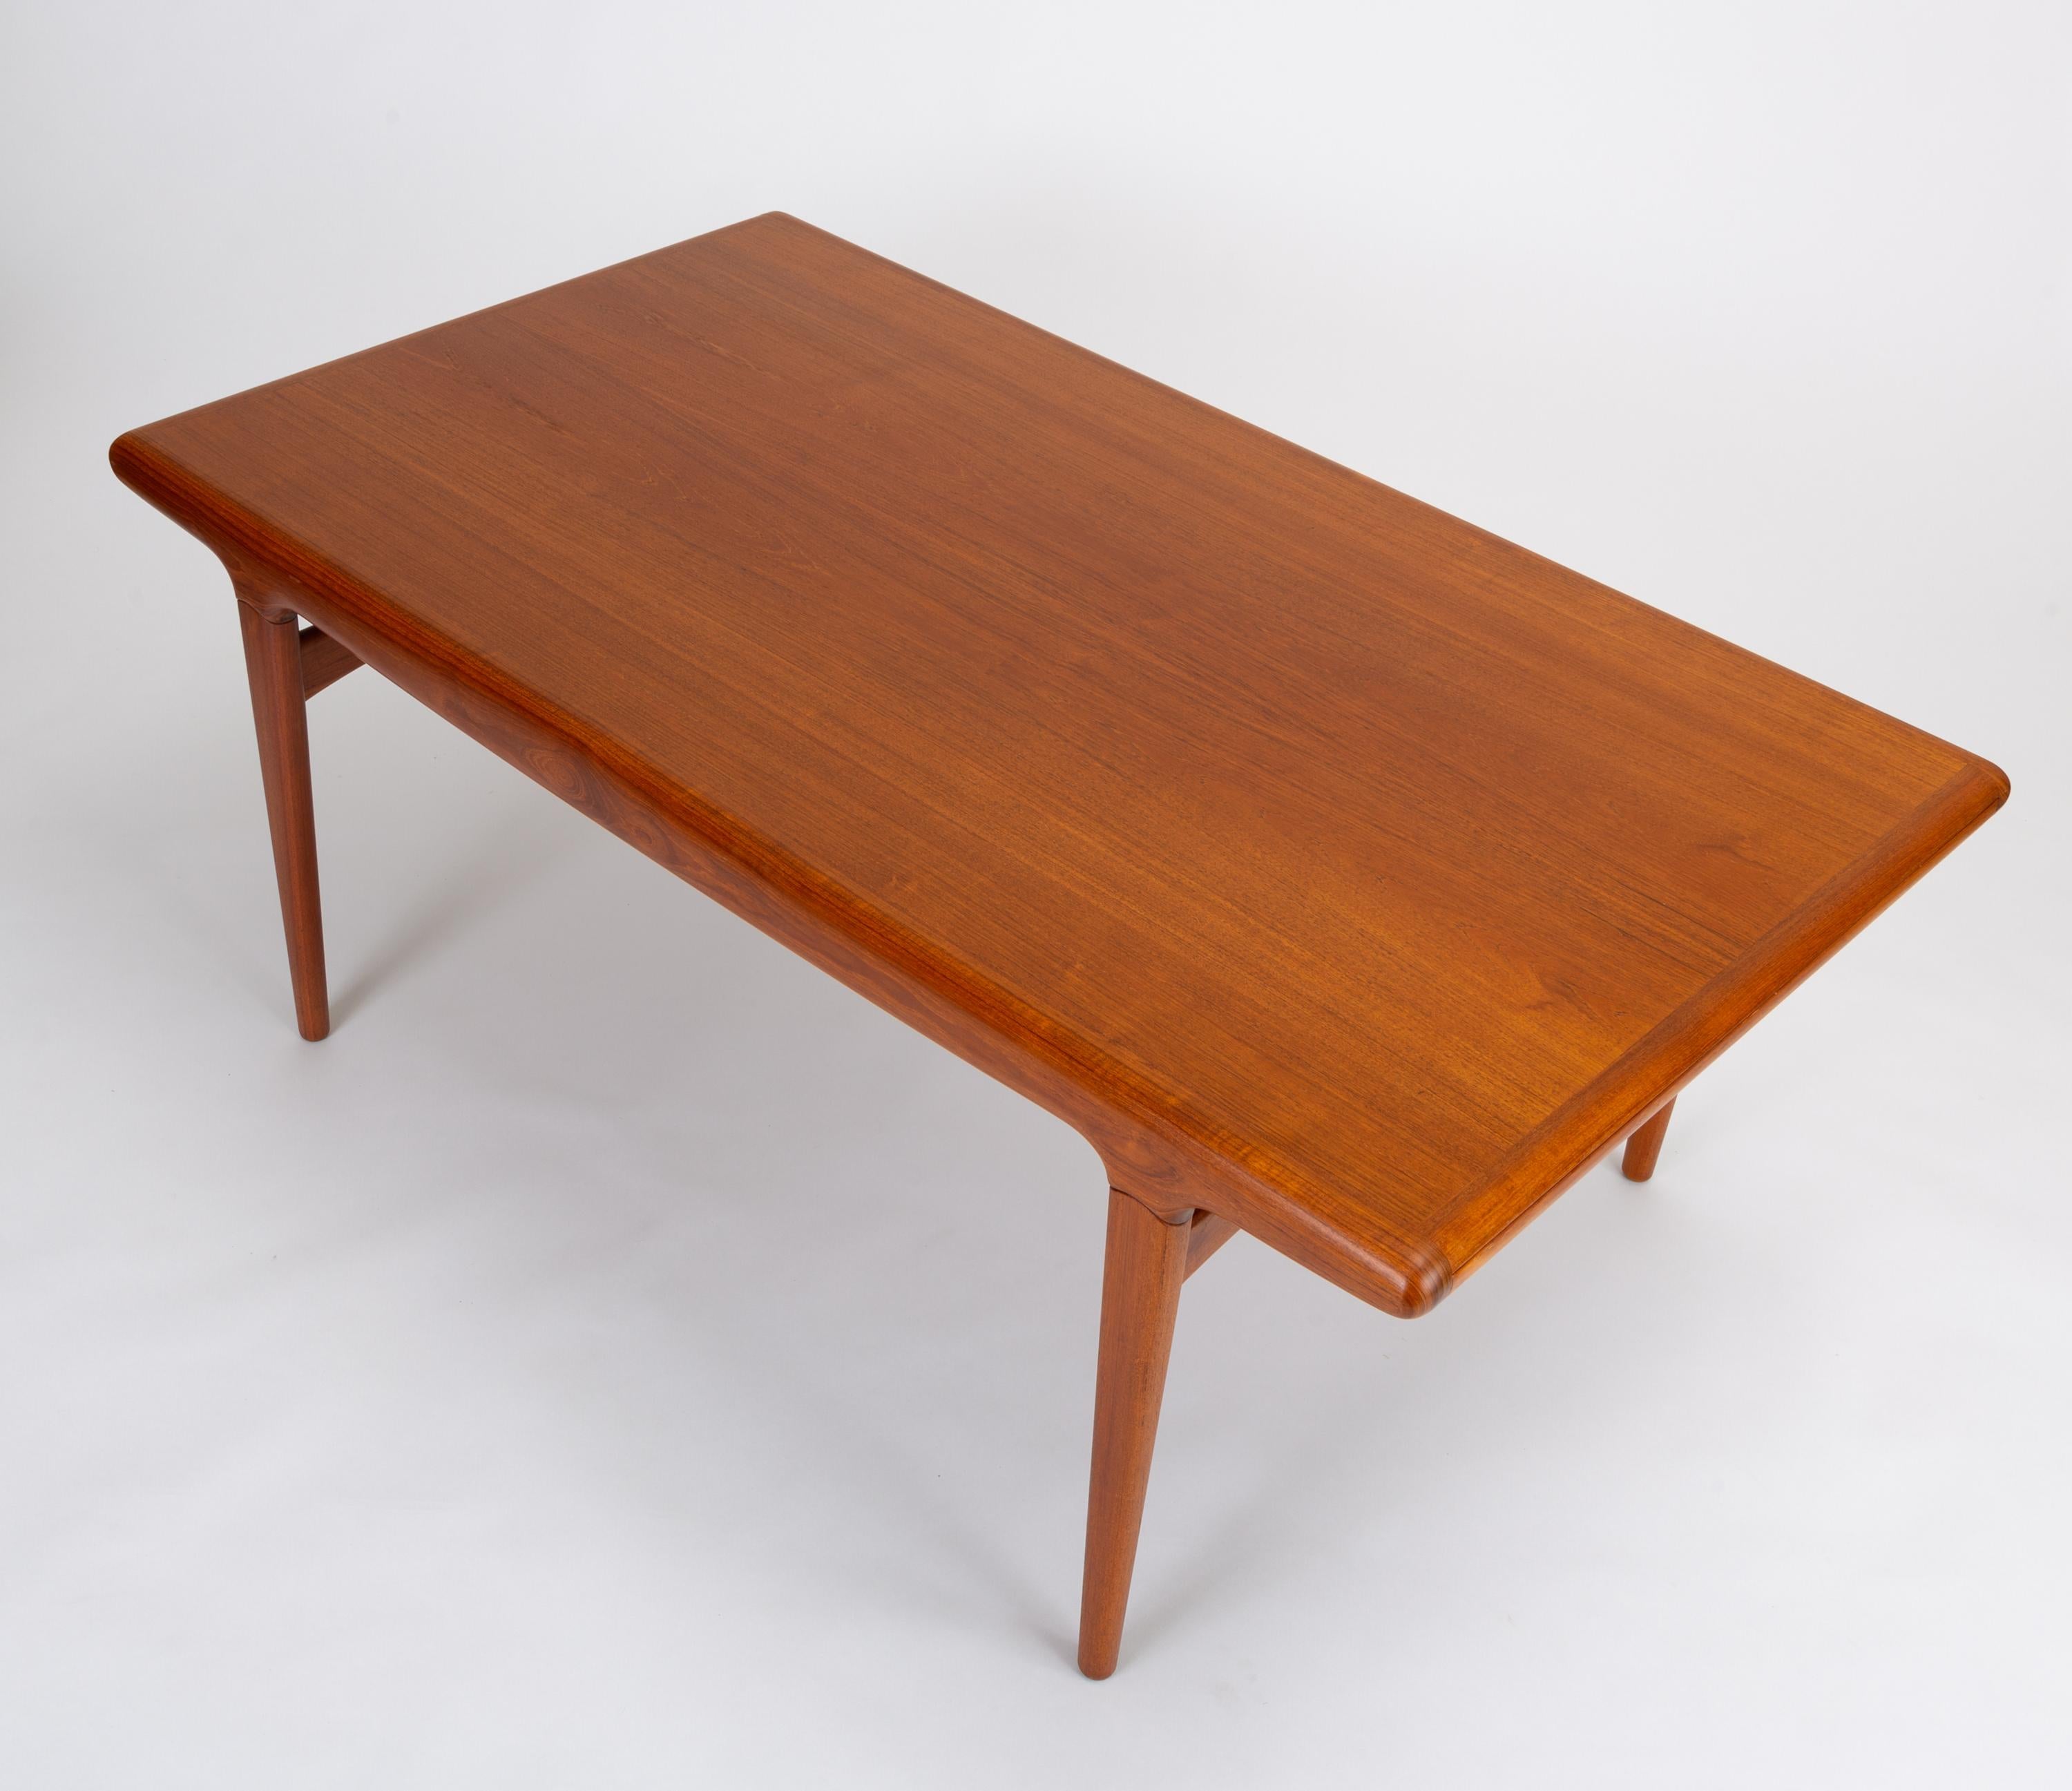 20th Century Danish Modern Dining Table with Leaves by Johannes Andersen for Uldum